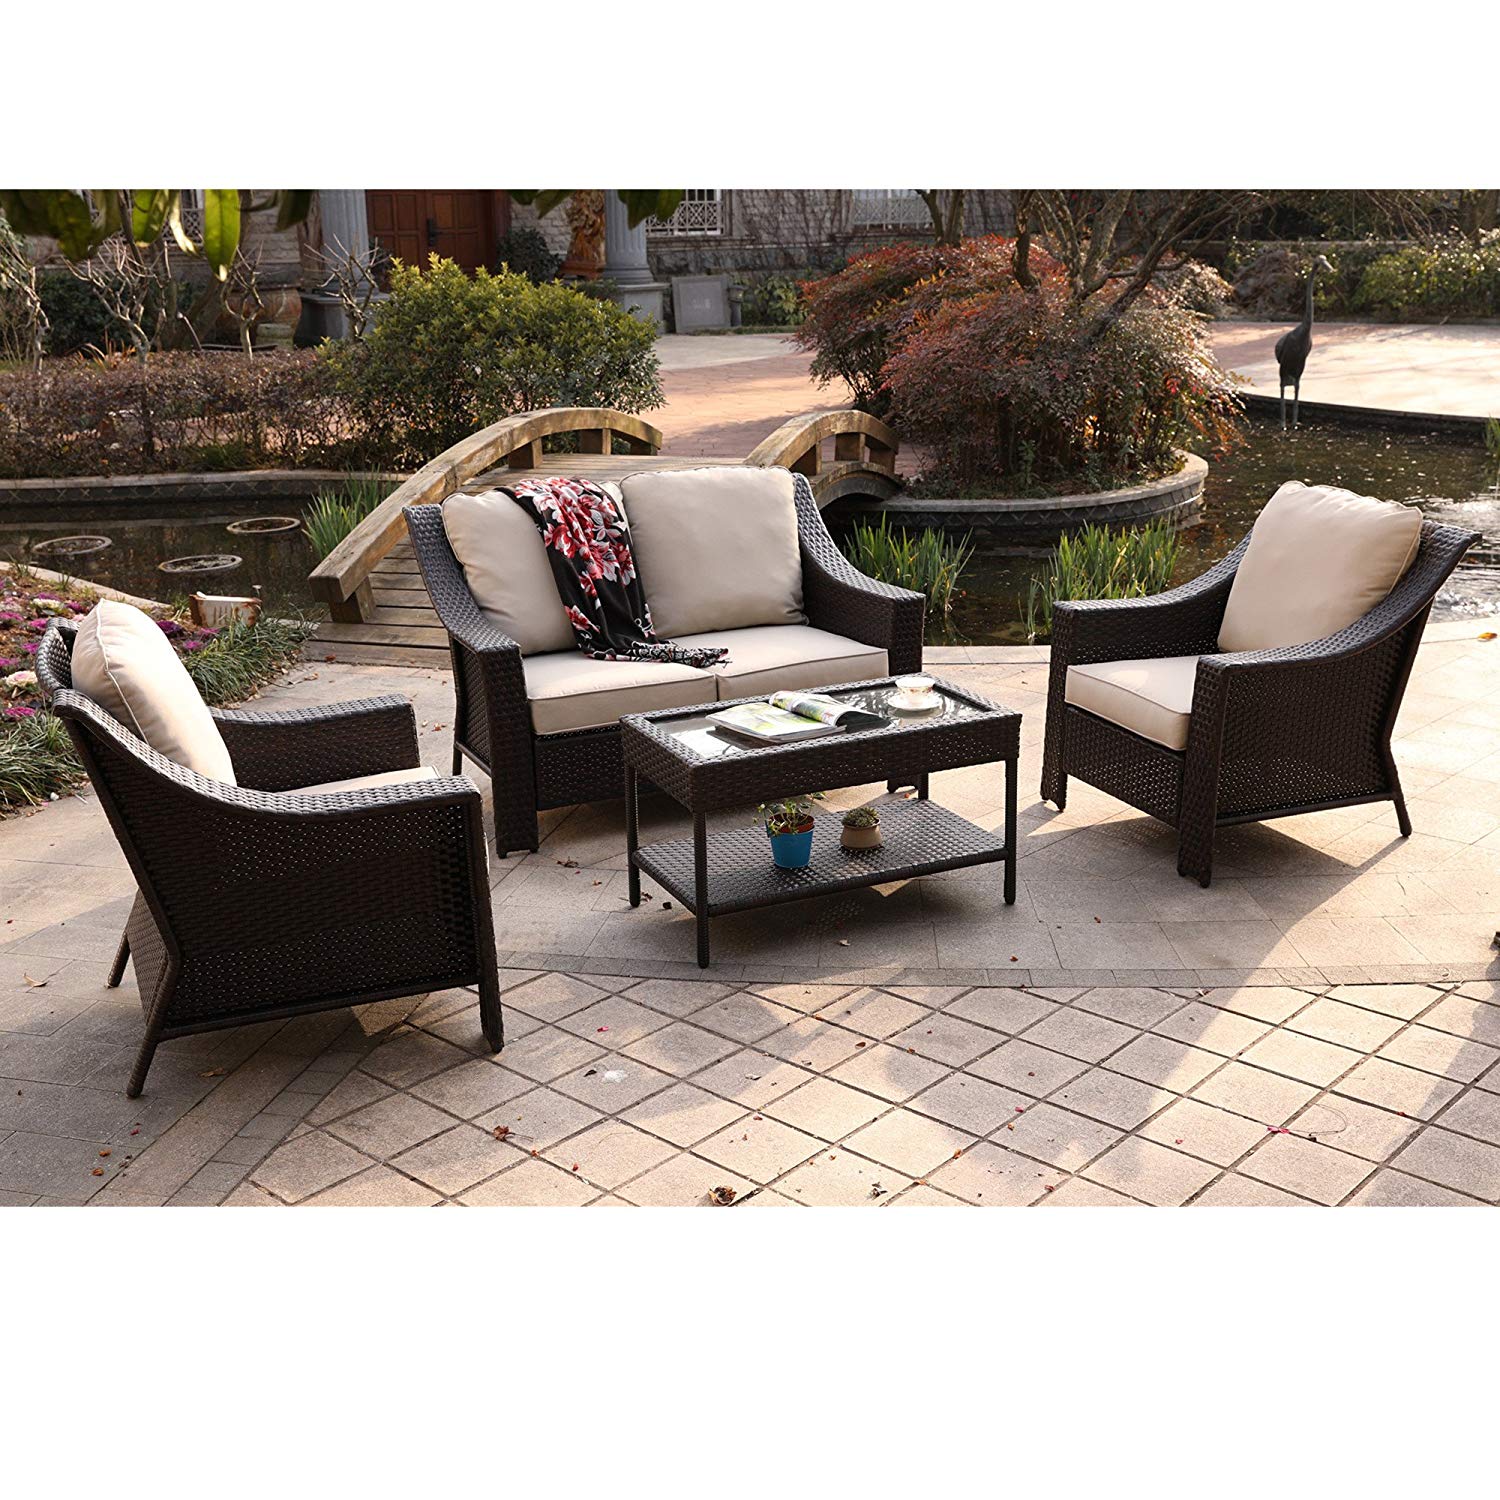 Back to Basics: 5 Patio Must-Haves for the Best Lounging Experience